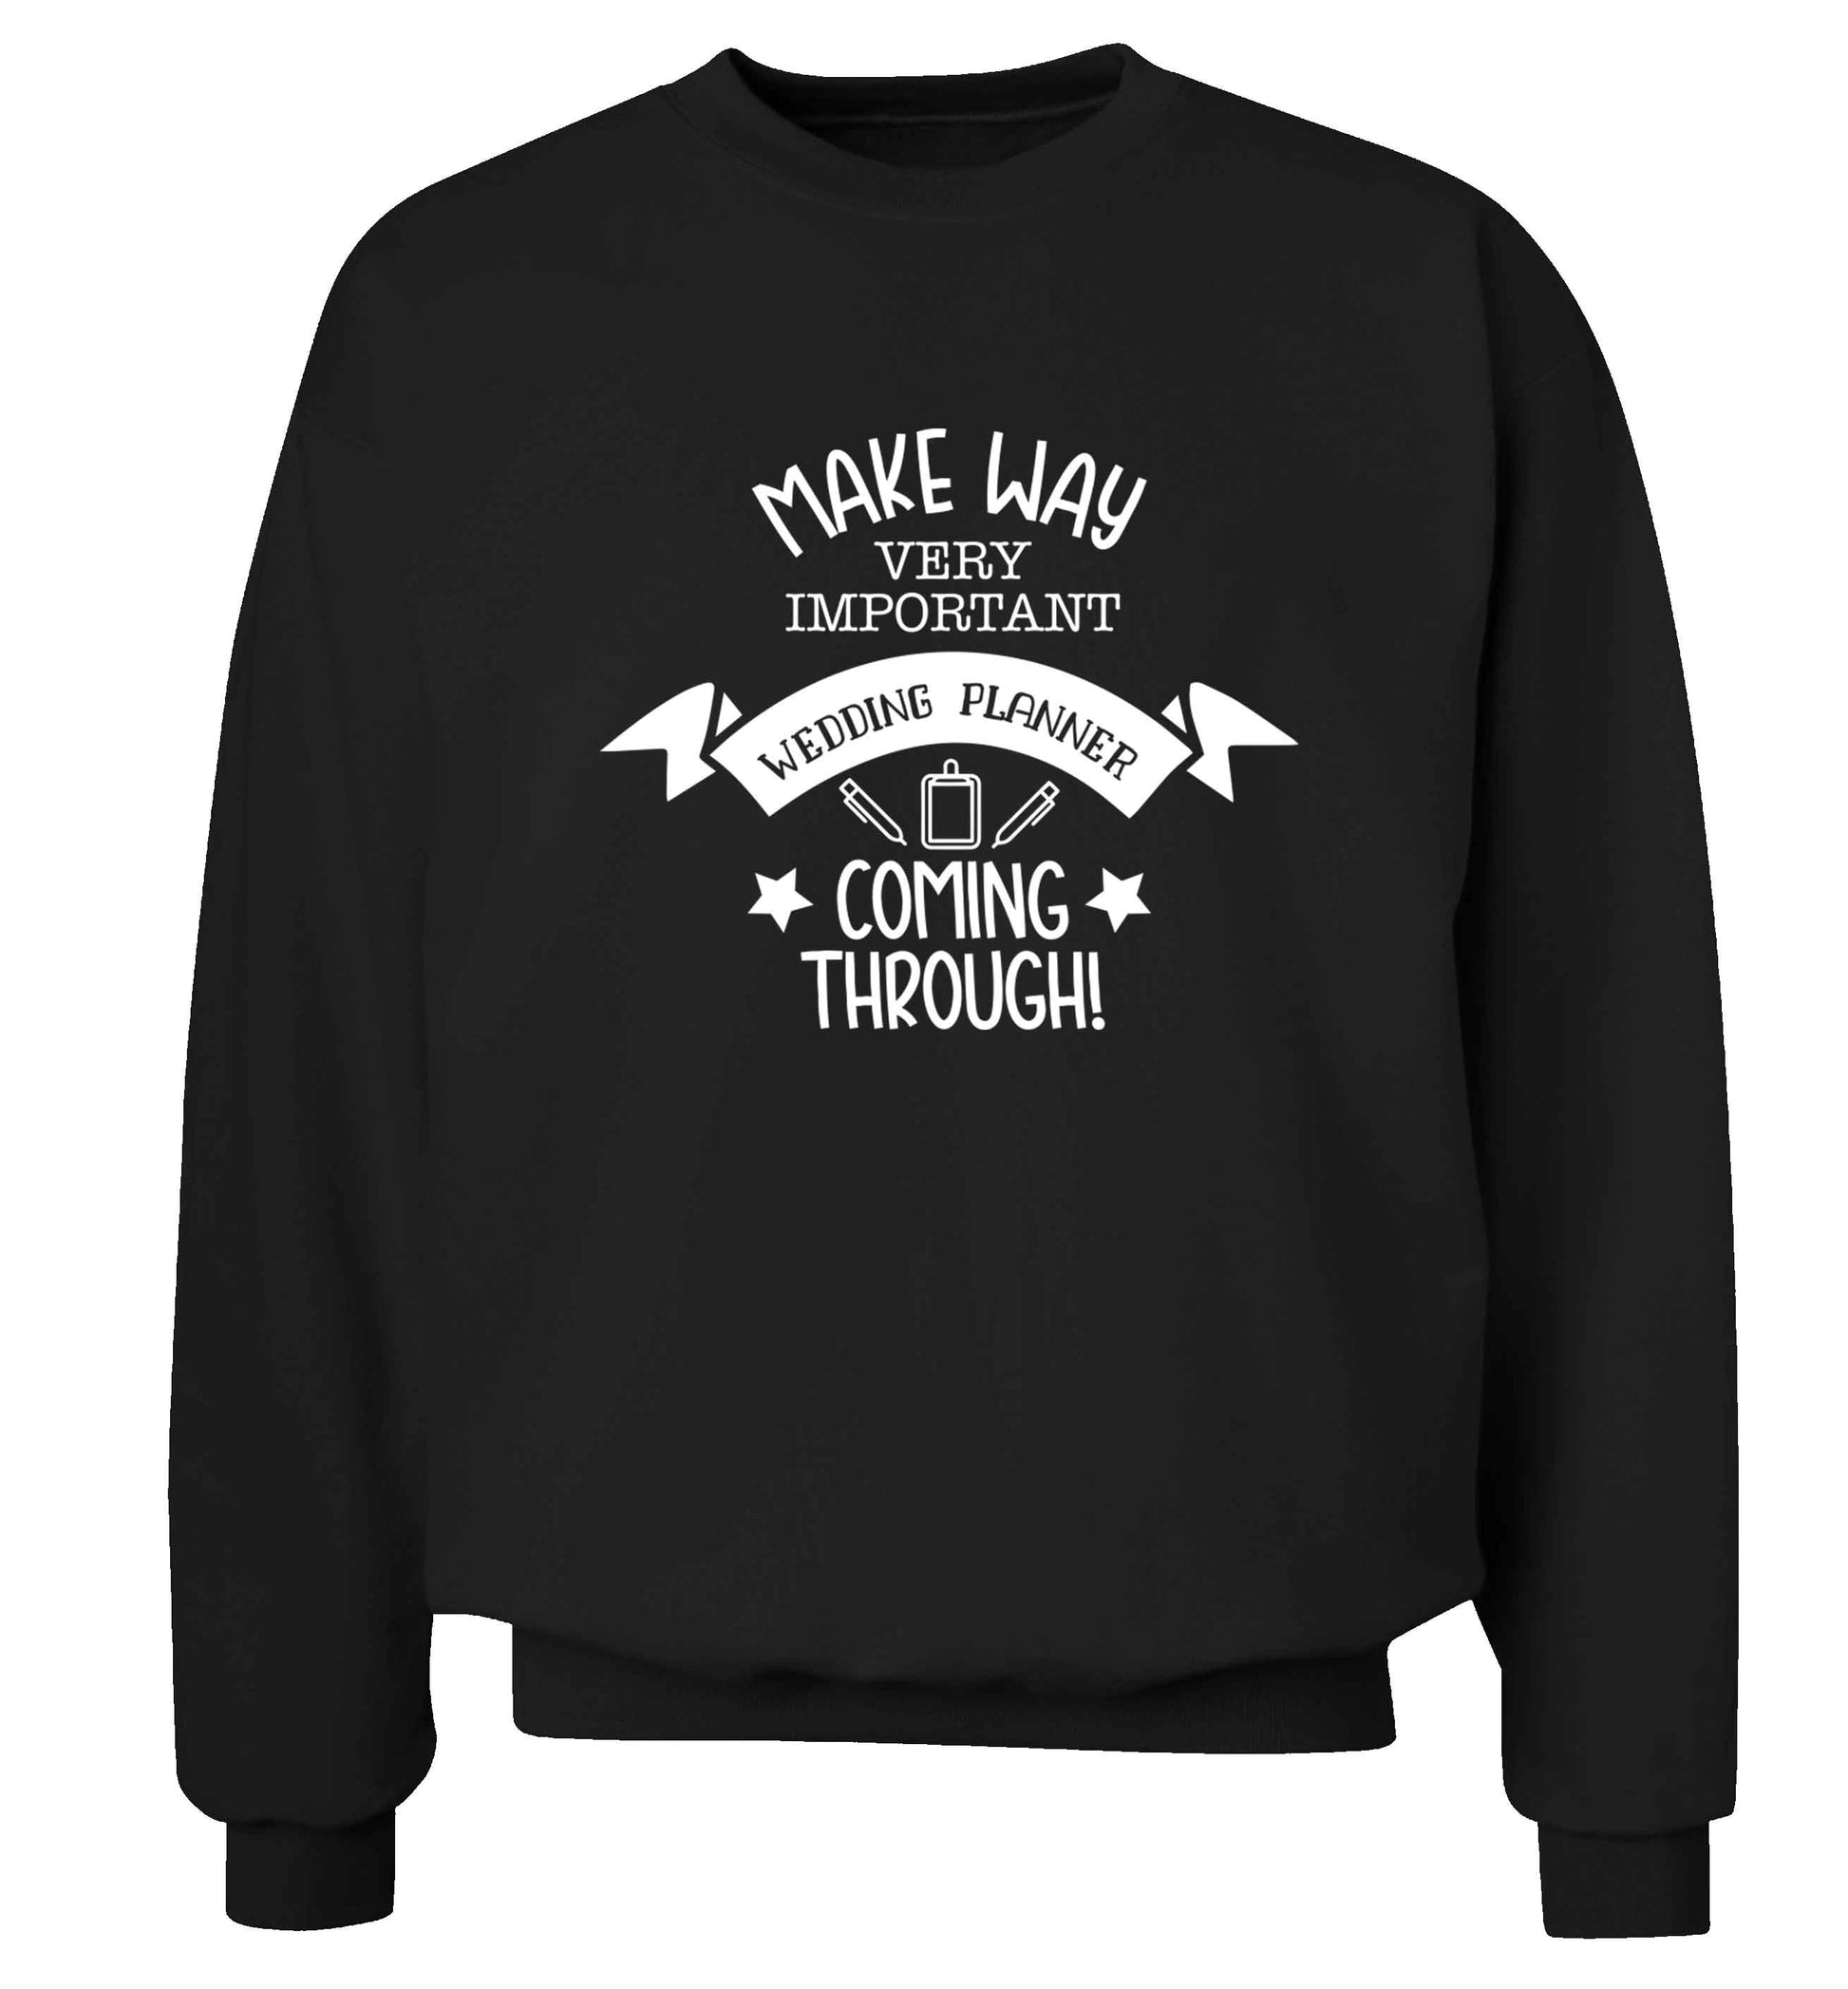 Make way very important wedding planner coming through Adult's unisex black Sweater 2XL